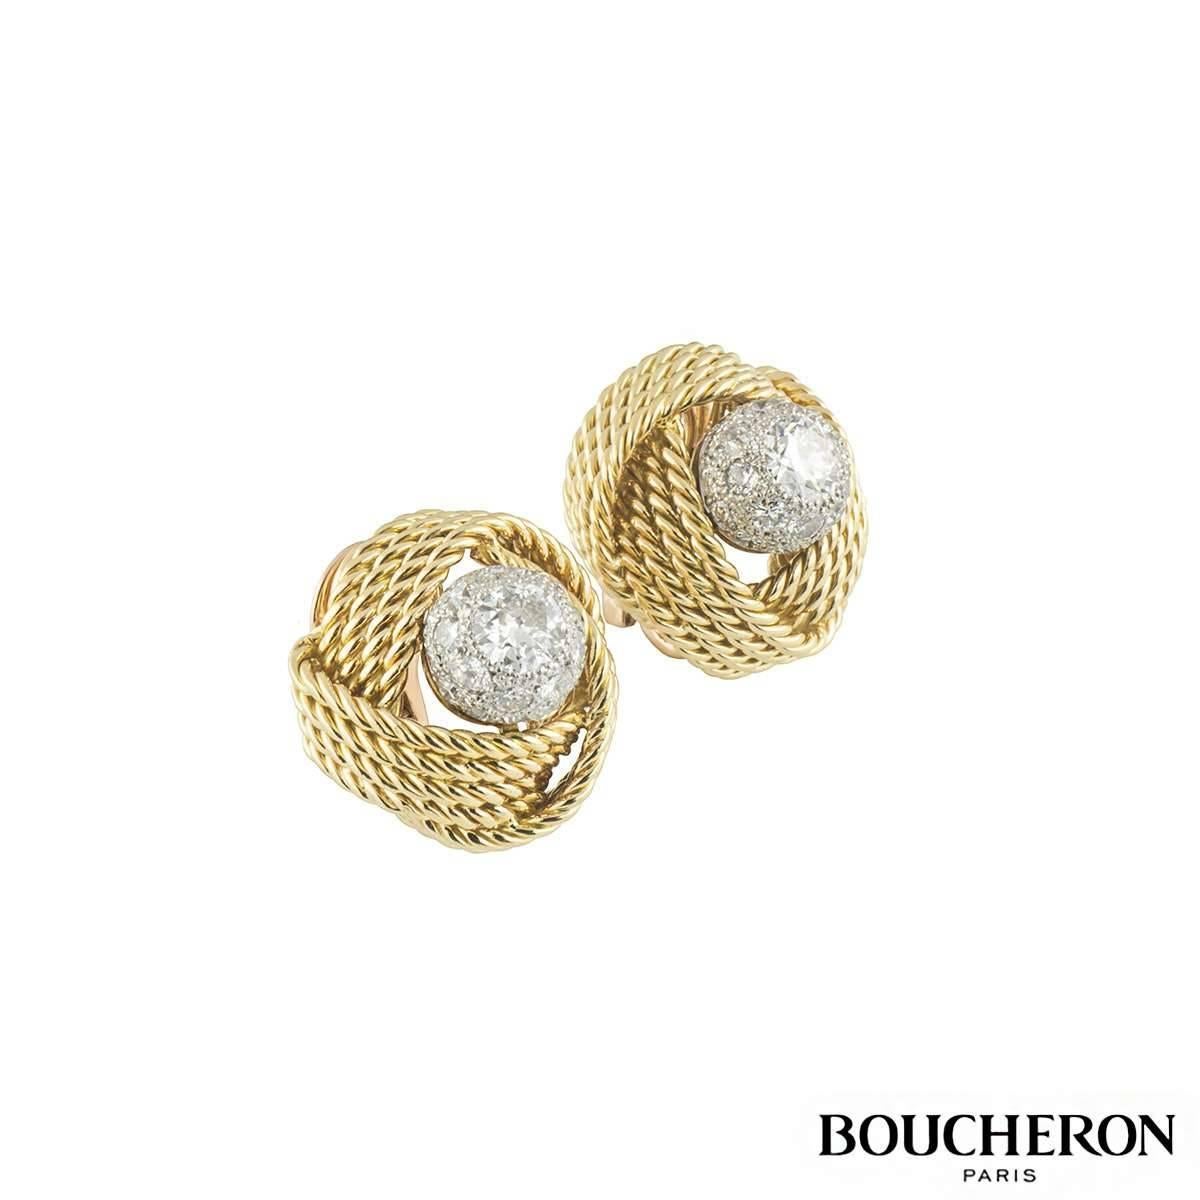 A stunning pair of vintage 18k yellow gold earrings by Boucheron C1920. The earrings are of a 4 rope knot design enclosing a diamond set stud in the centre. The stud features round brilliant cut pave set diamonds to the outer edge and a larger